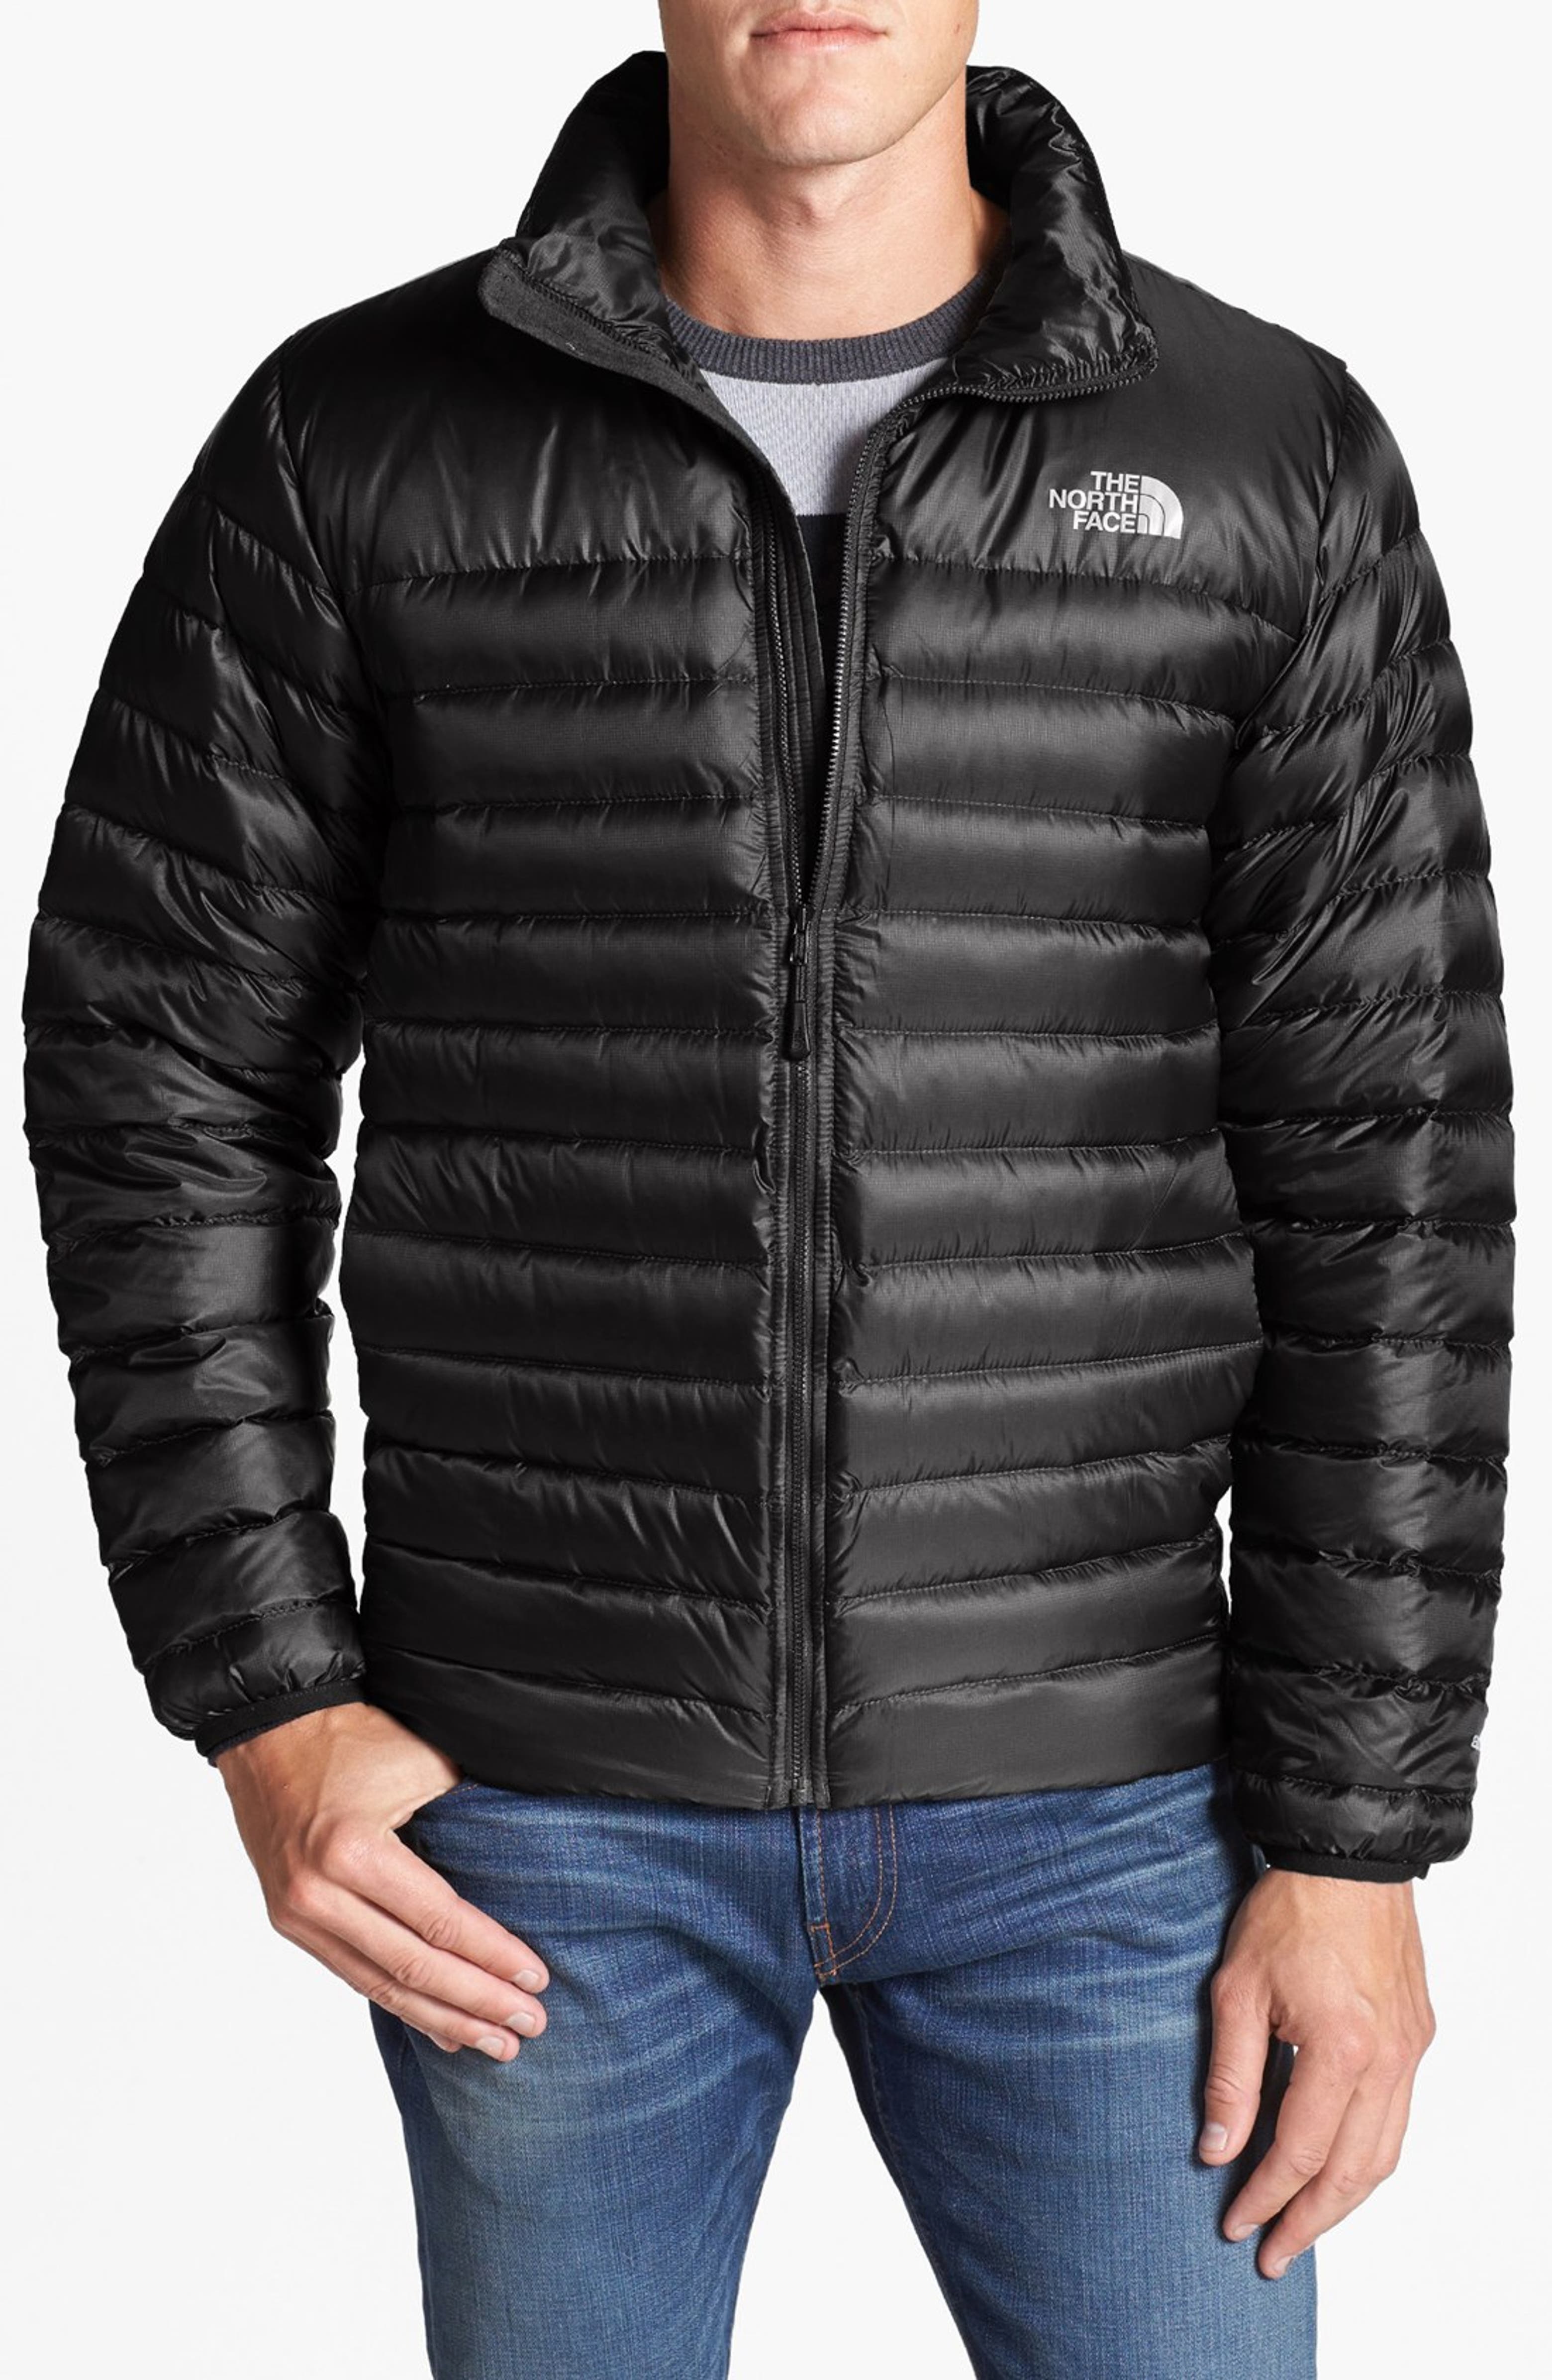 The North Face 'Thunder' Water Resistant Down Jacket Nordstrom